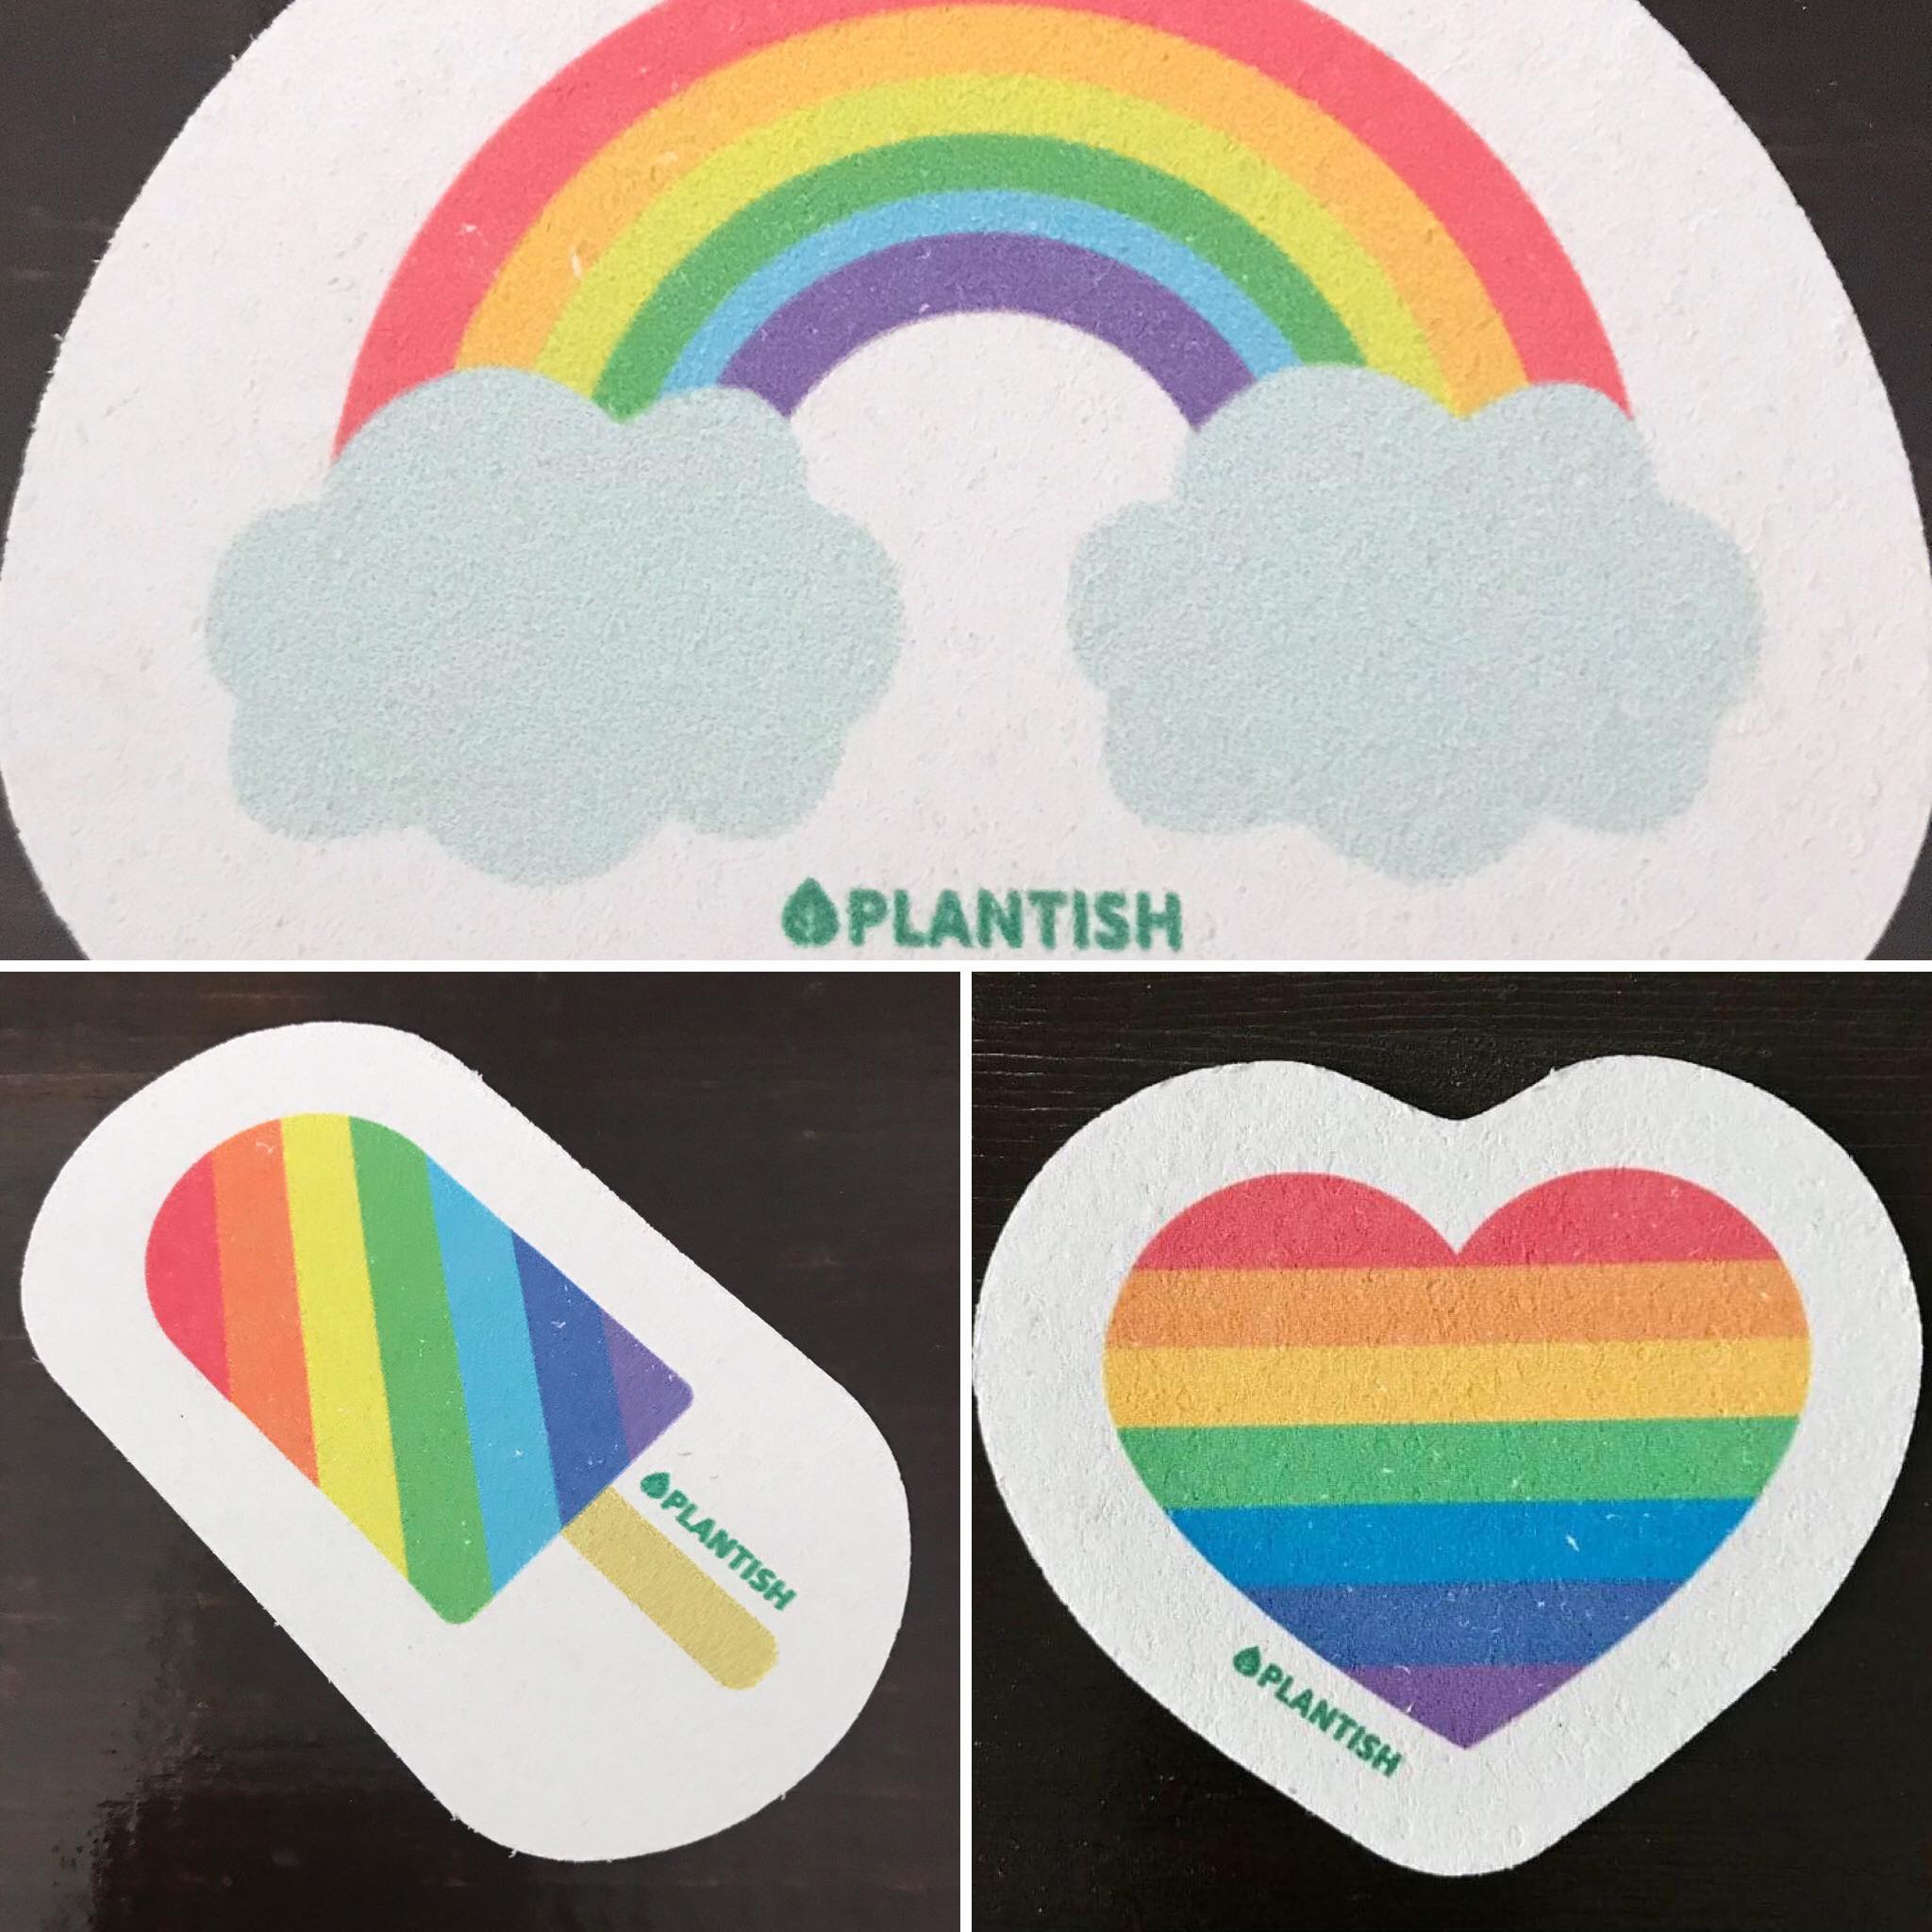  These LGBTQ+ Pride Pop-up Sponges are a limited feature collection from the Canadian brand Plantish to celebrate Pride Months around the globe